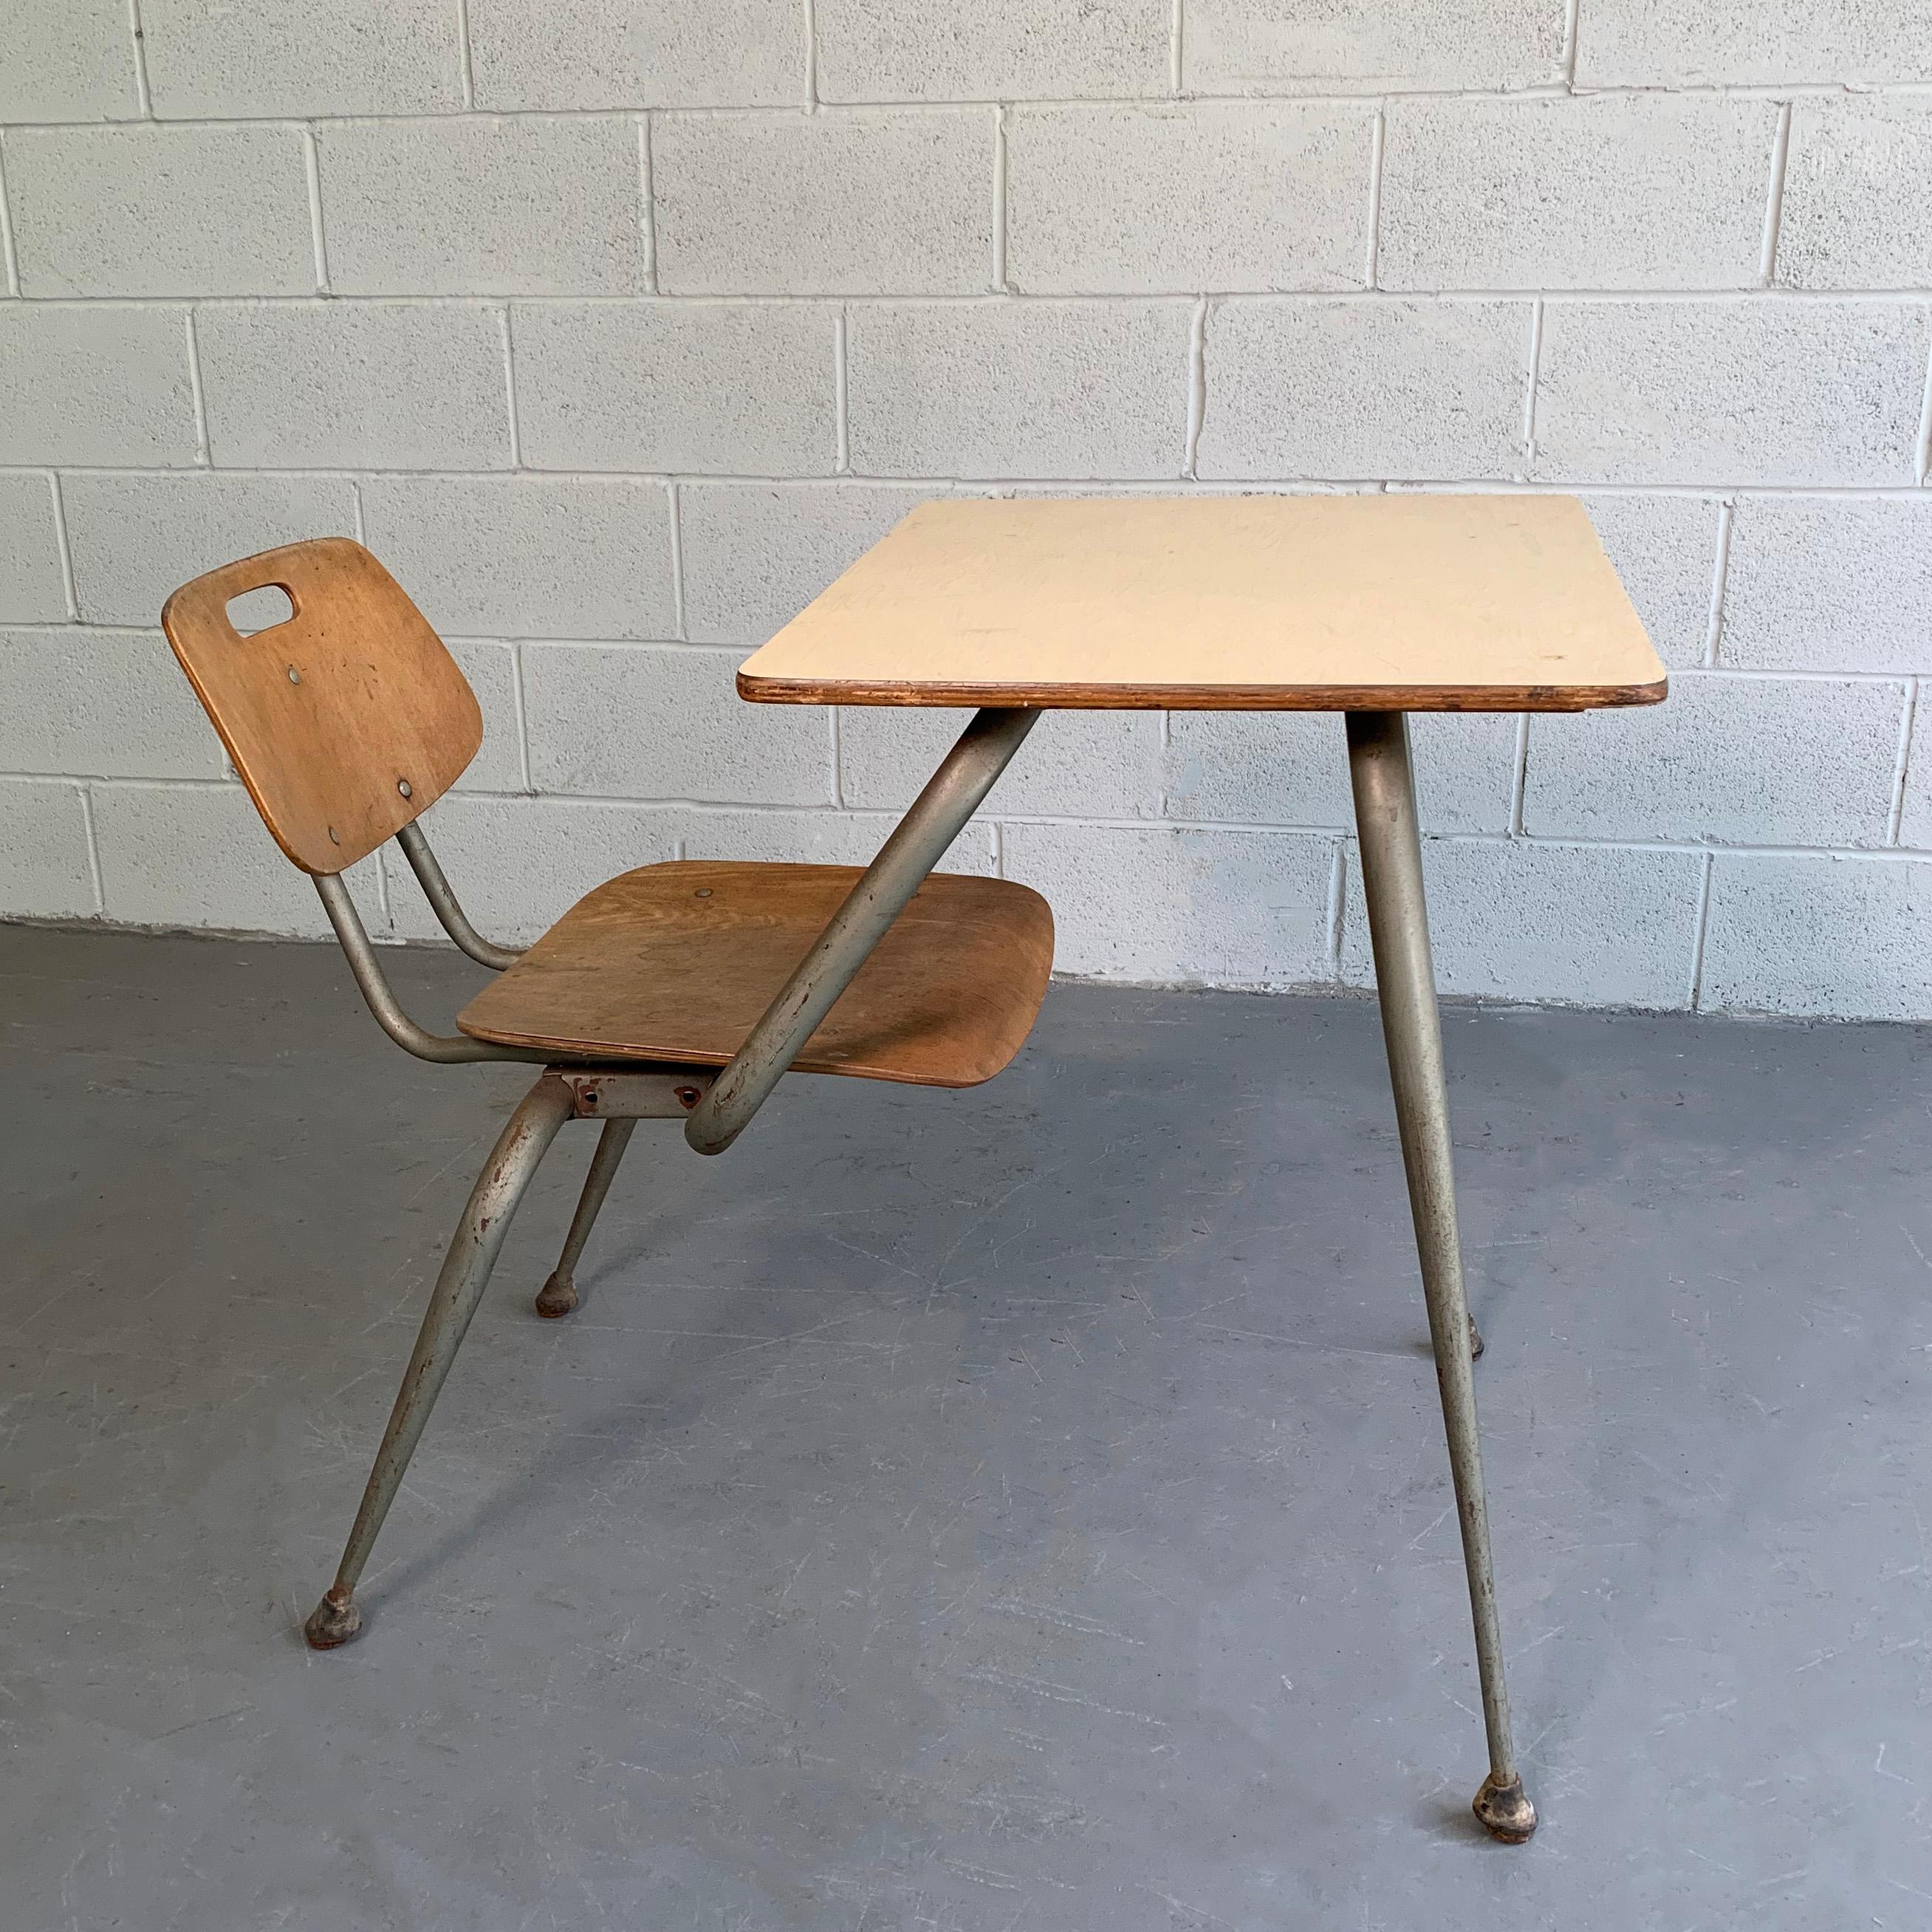 chair with desk attached